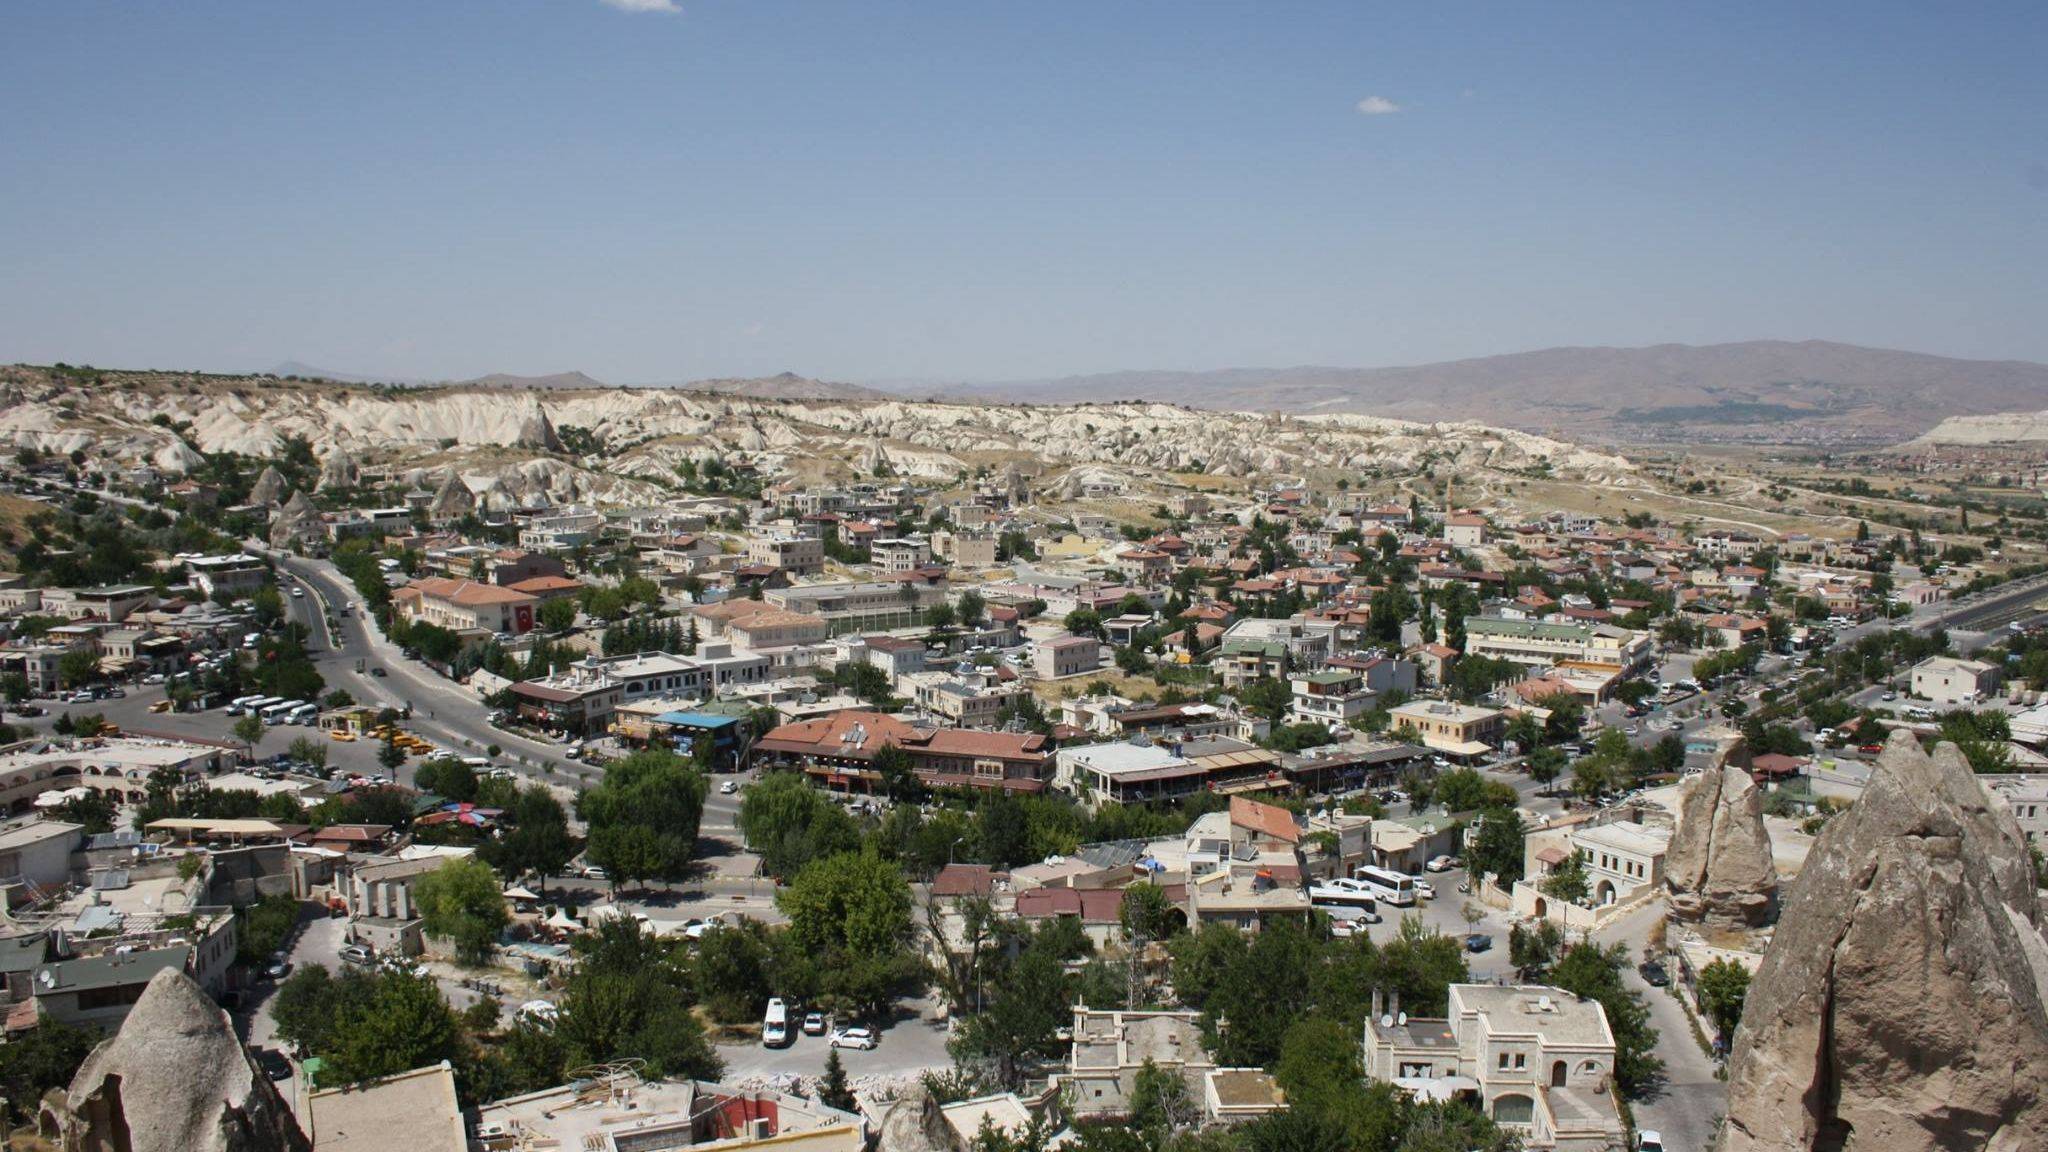 Nevsehir: a city in the Central Anatolia region. The name is derived from the Persian Naw-Shahr, meaning ”New City”